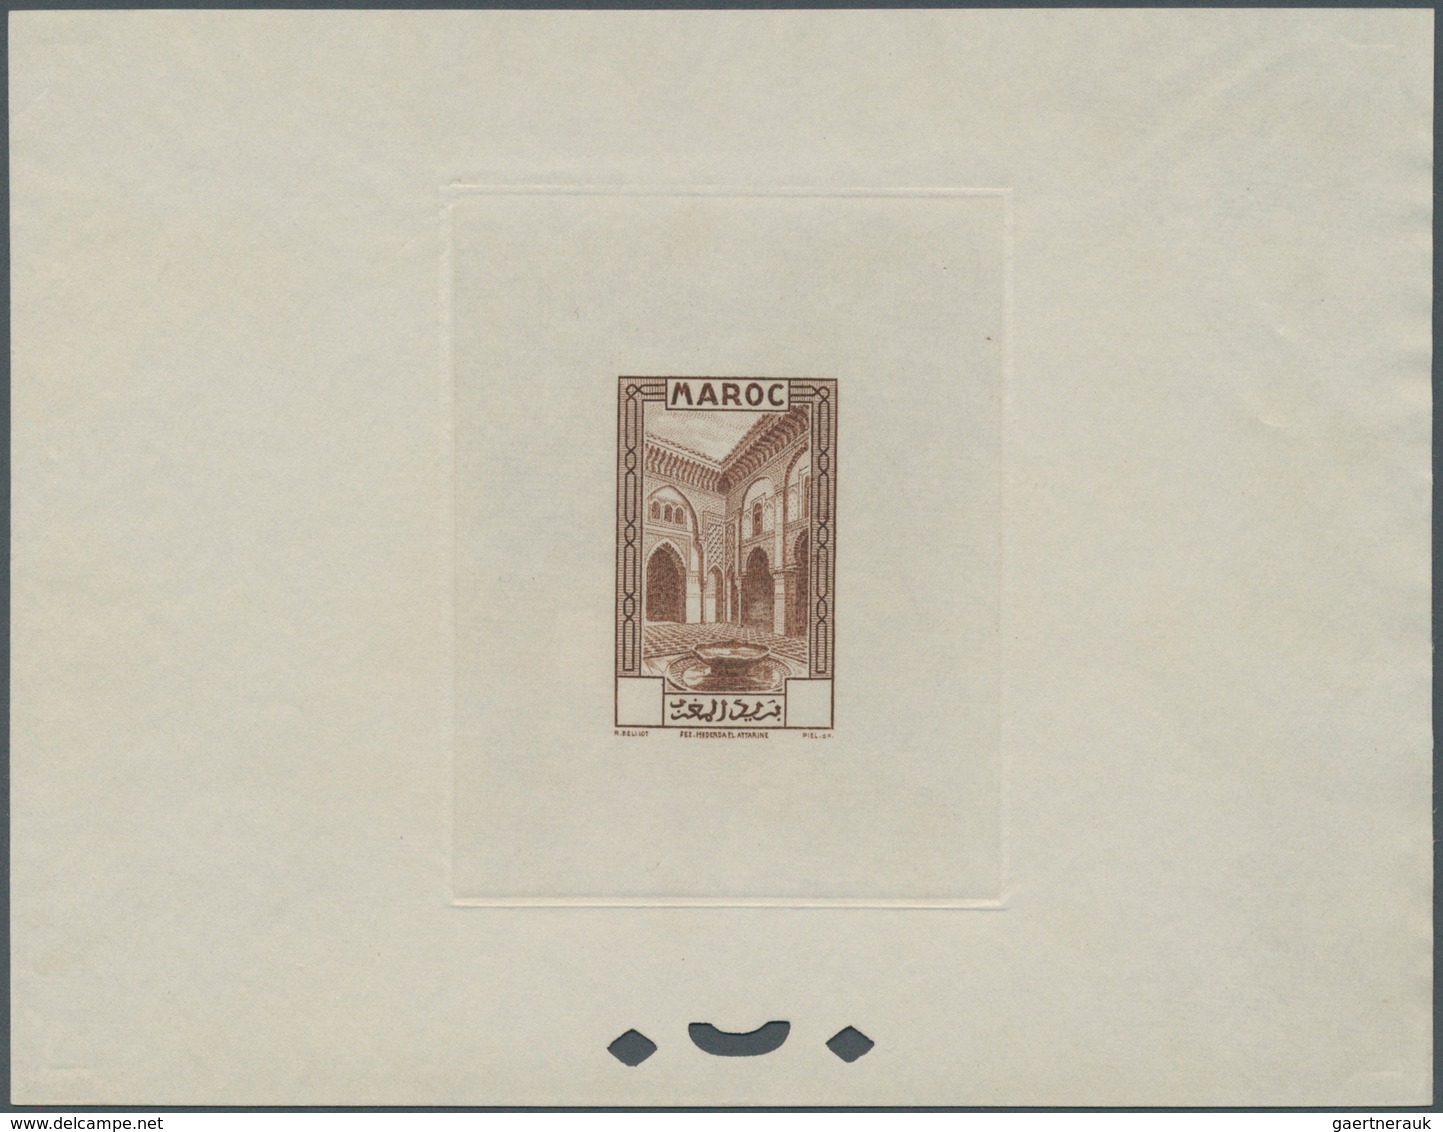 Marokko: 1933, Definitives "Views of Morocco", 1c. to 20fr., complete set of 24 values, epreuve with